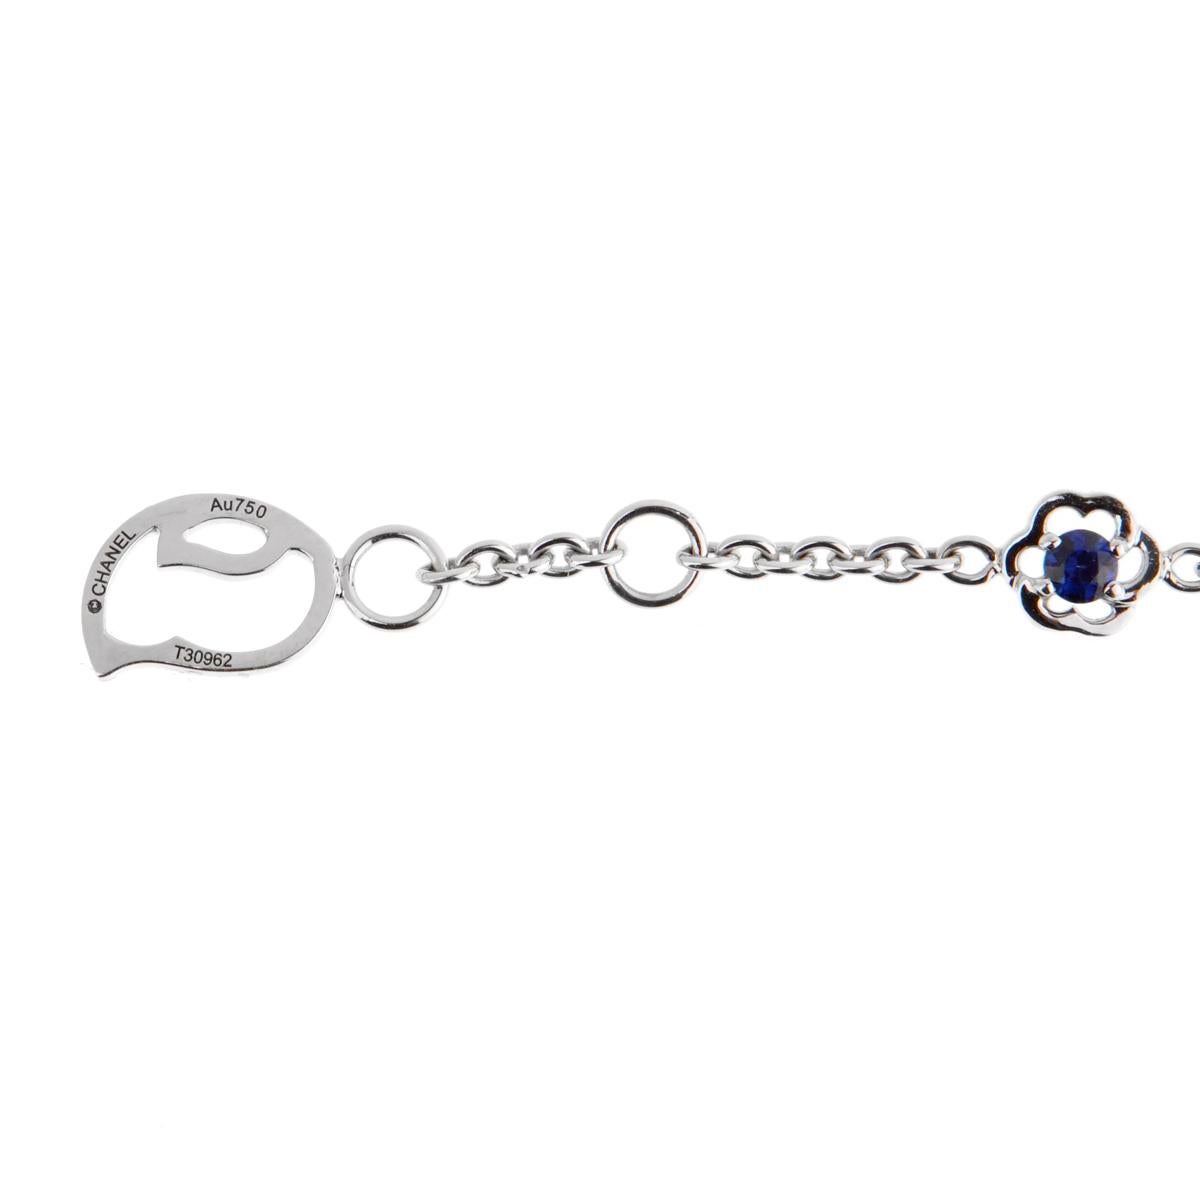 A fantastic Chanel bracelet featuring a Camellia flower set with blue sapphires, blue topaz and a round brilliant cut diamond followed by 2 delicate flowers set in 18k white gold.